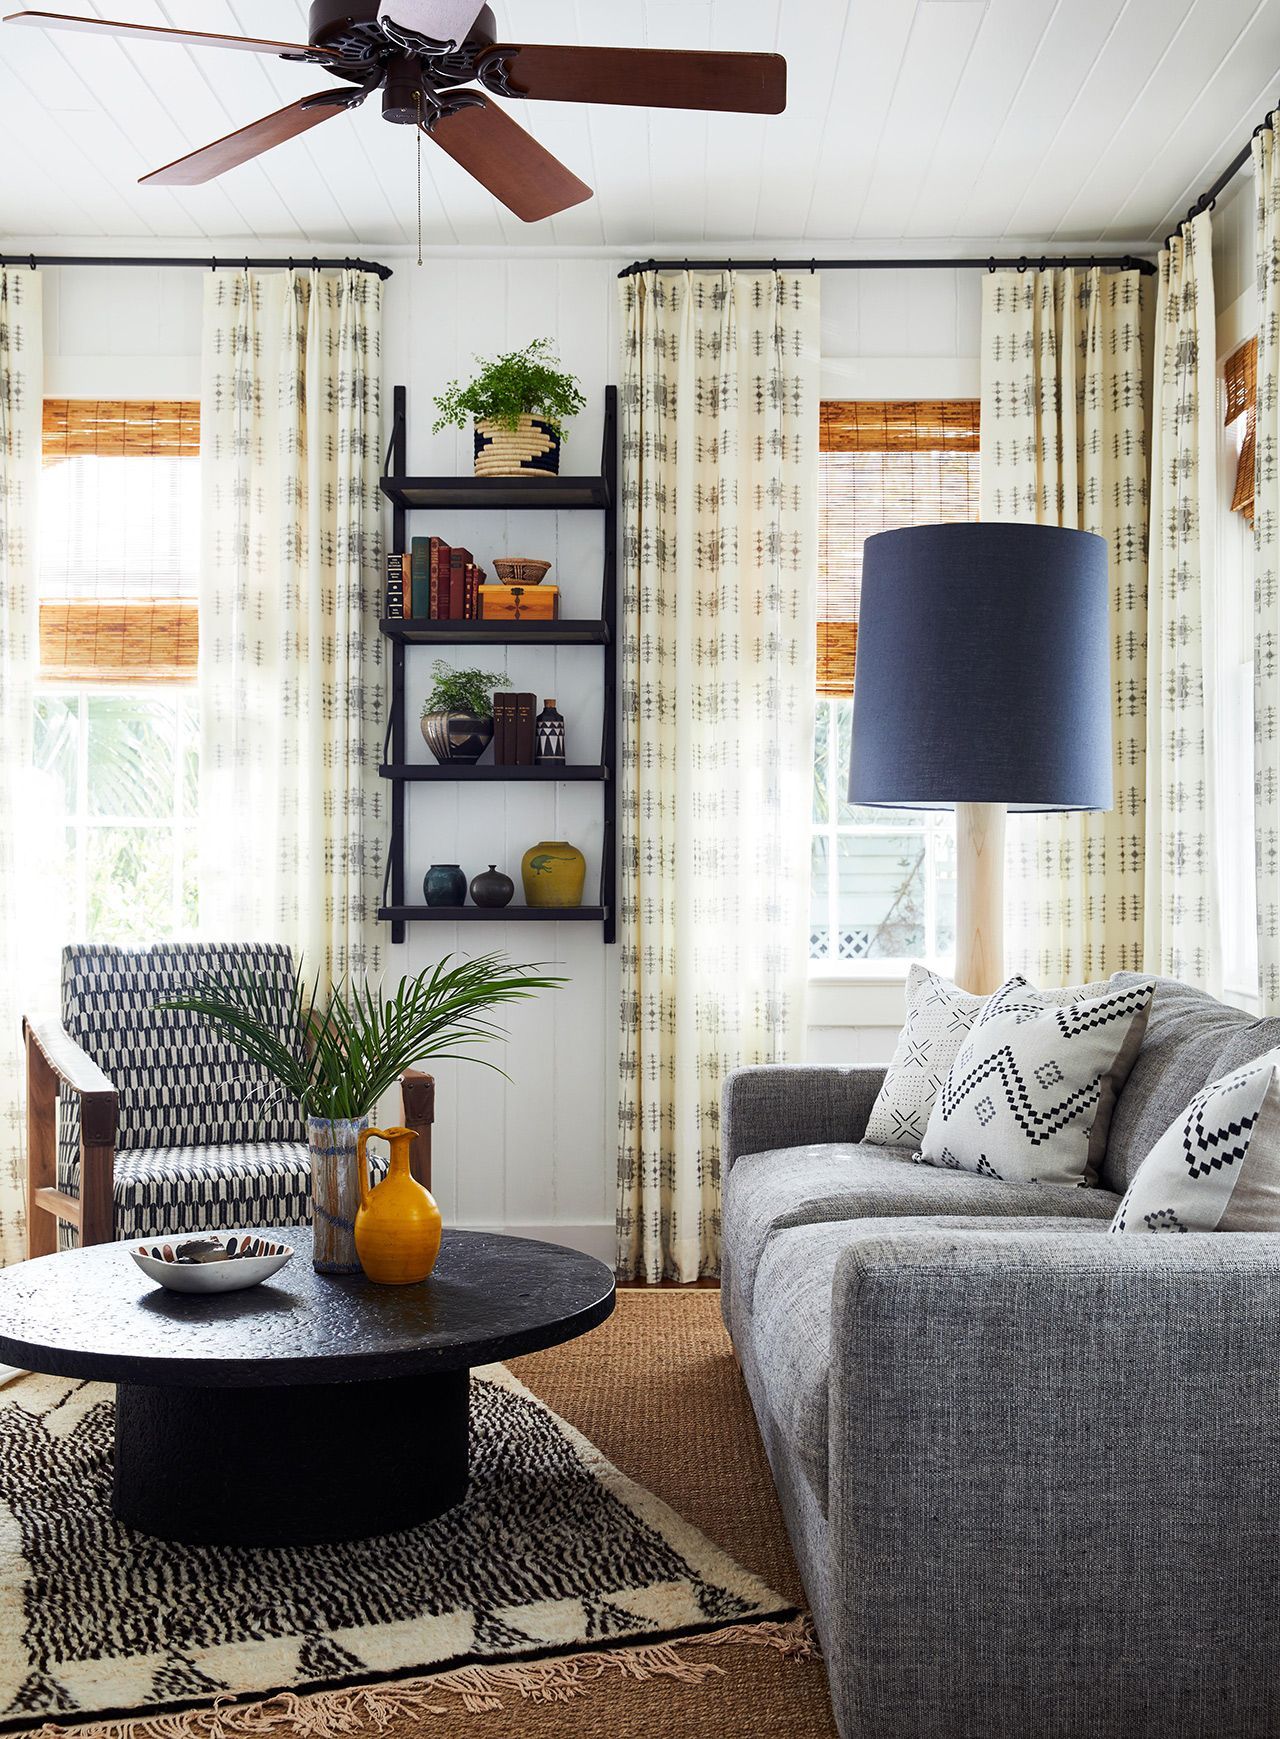 Living Room Furniture Decor: Transform Your Space With Style